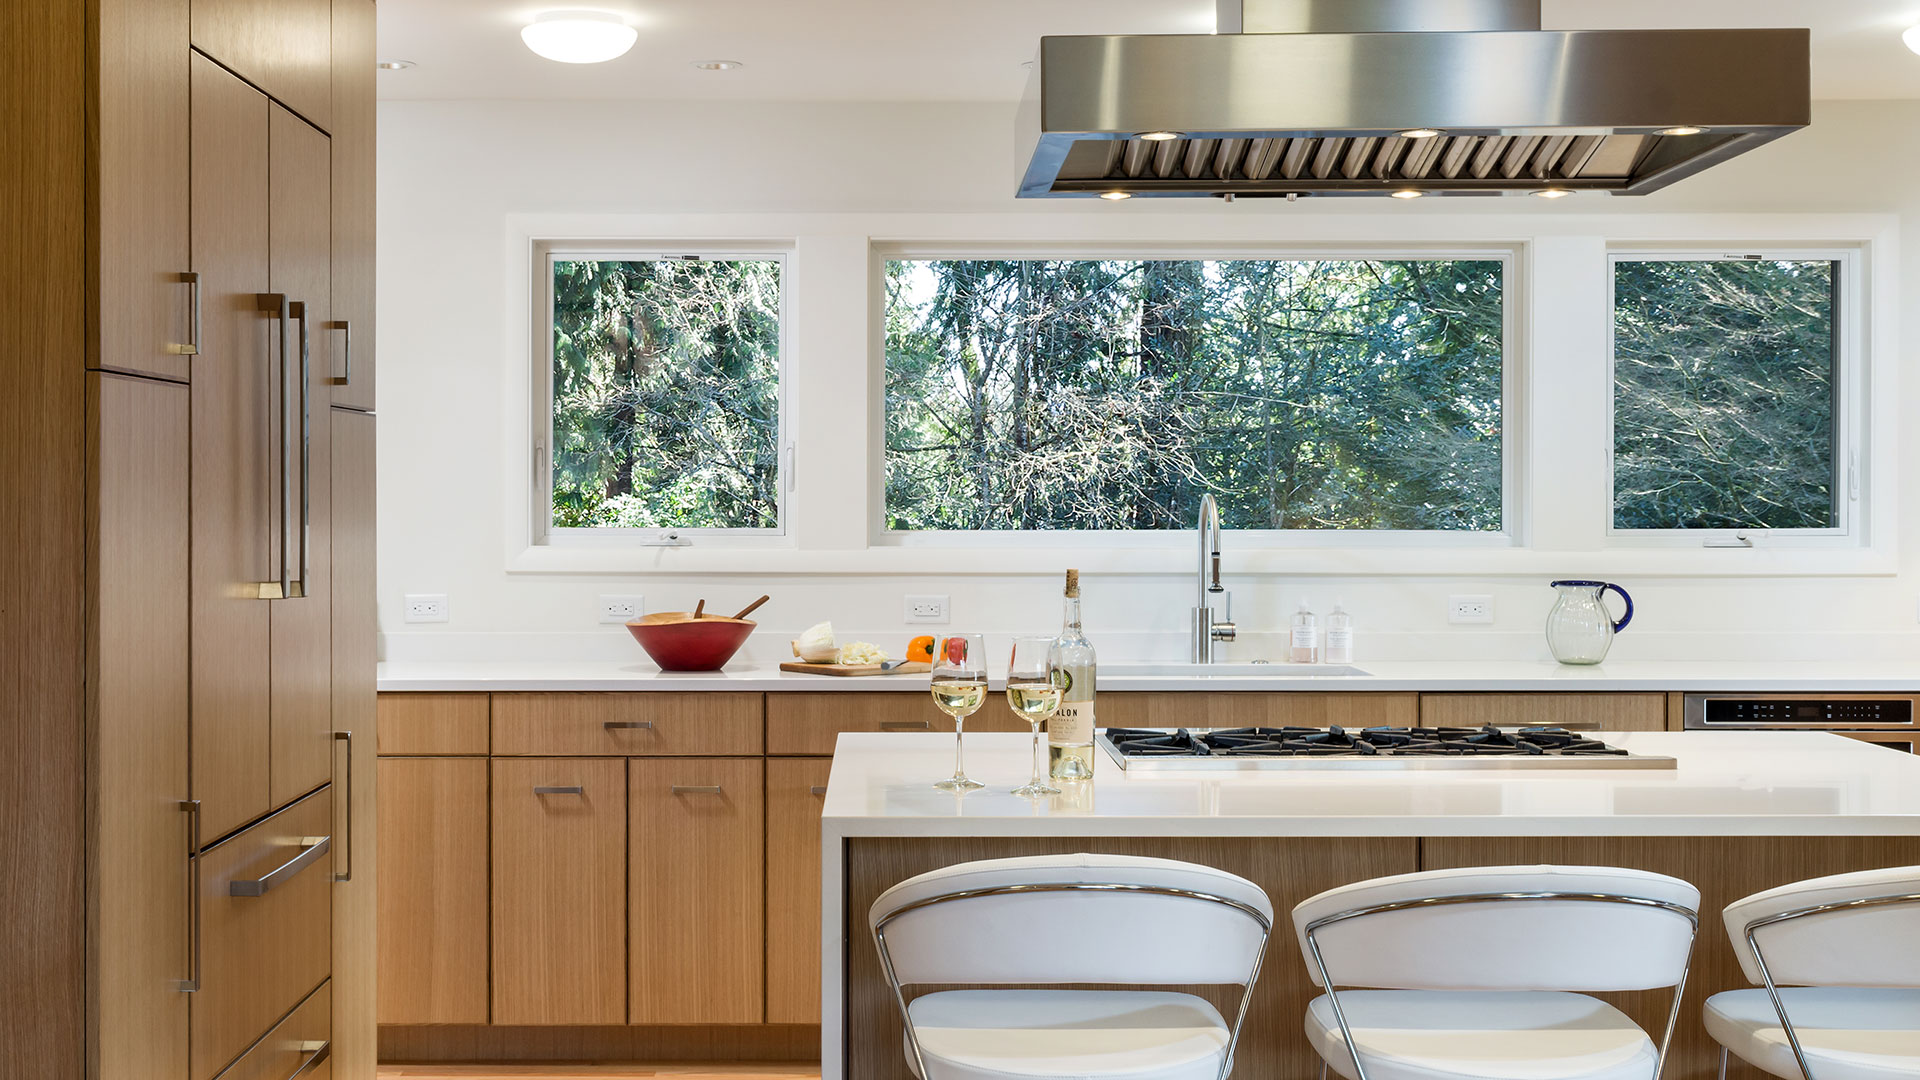 This entertainer's kitchen has a view of the tree-filled back yard.